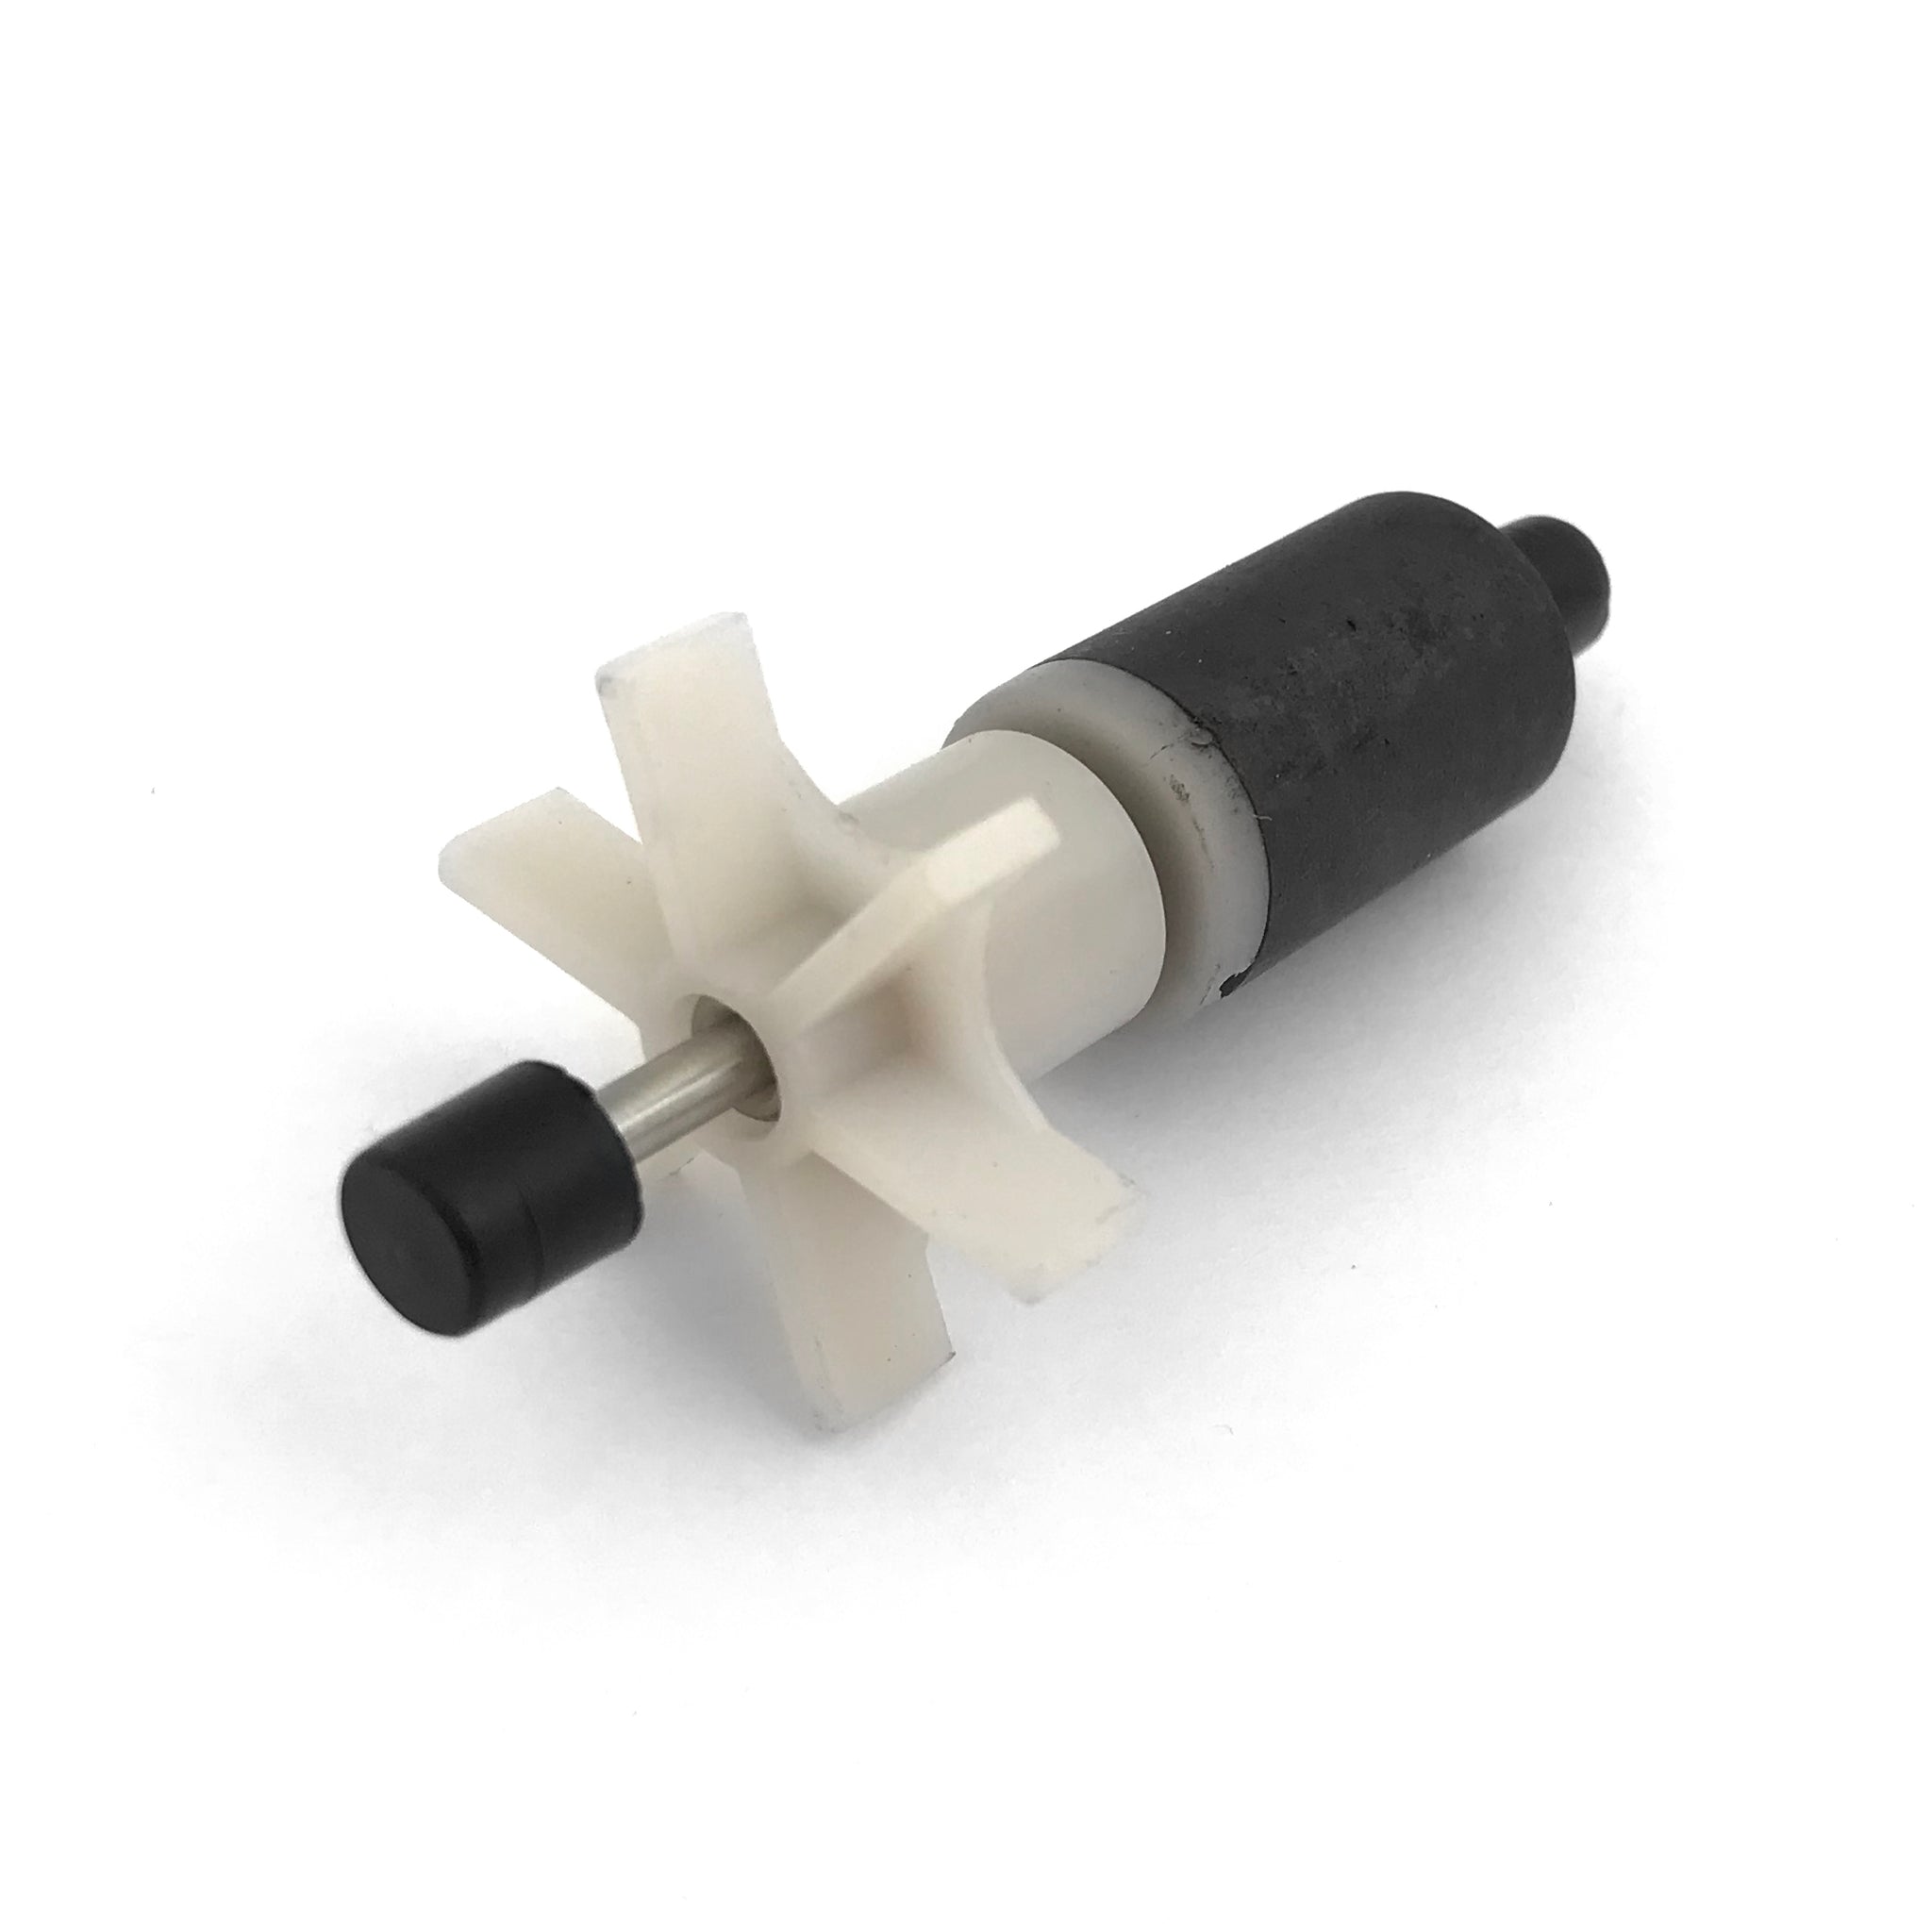 REPLACEMENT IMPELLER FOR SP-290 PUMP